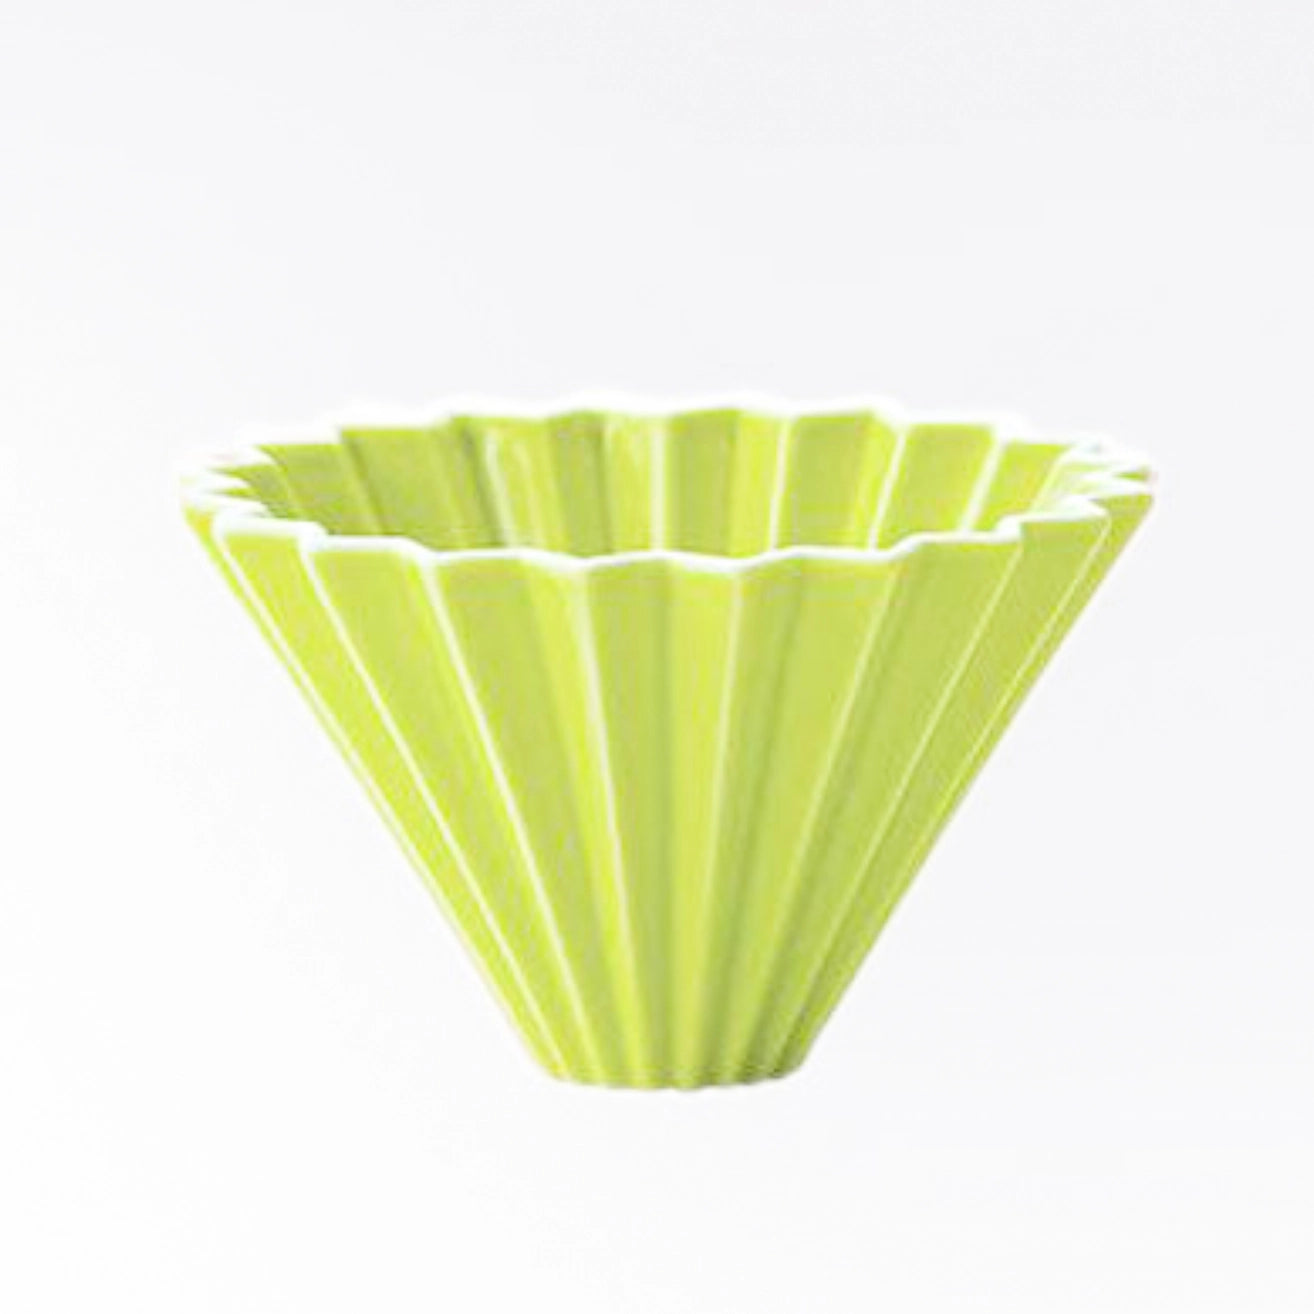 Origami Pour Over Coffee Dripper in Spring Green